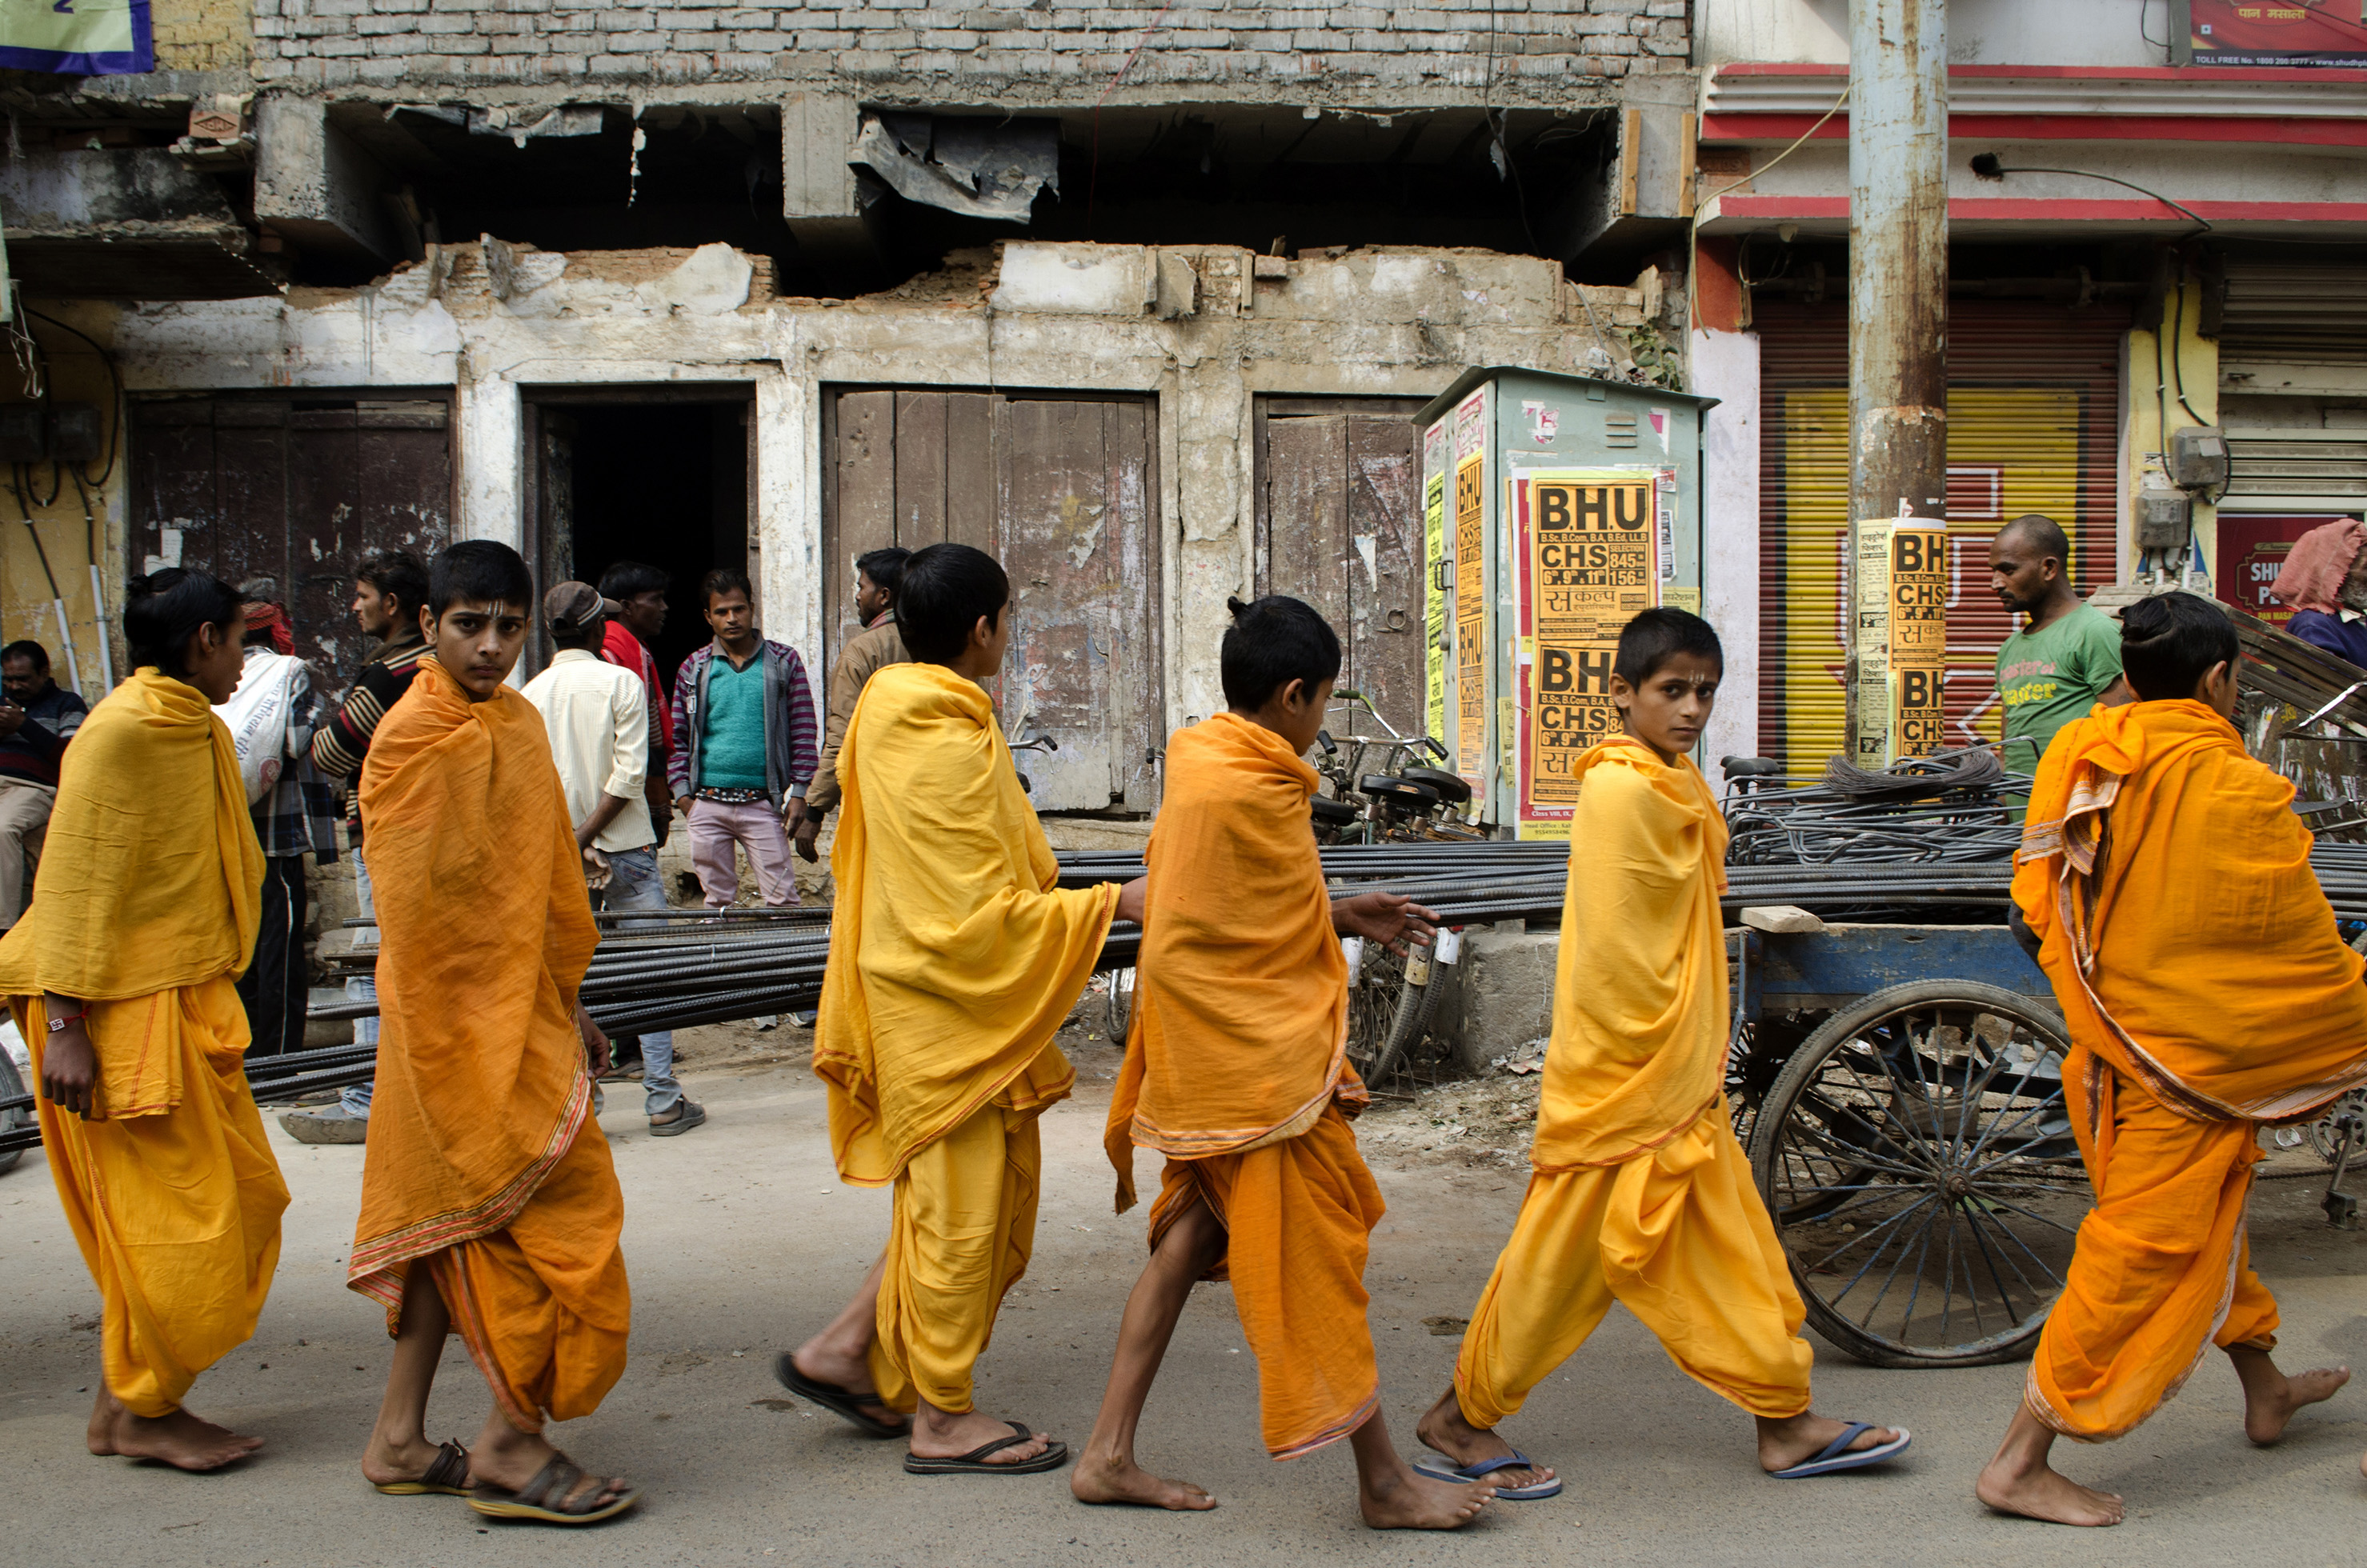 The devotion of the young pilgrims to become priests. Kids walking in the chaotic city of Varanasi.